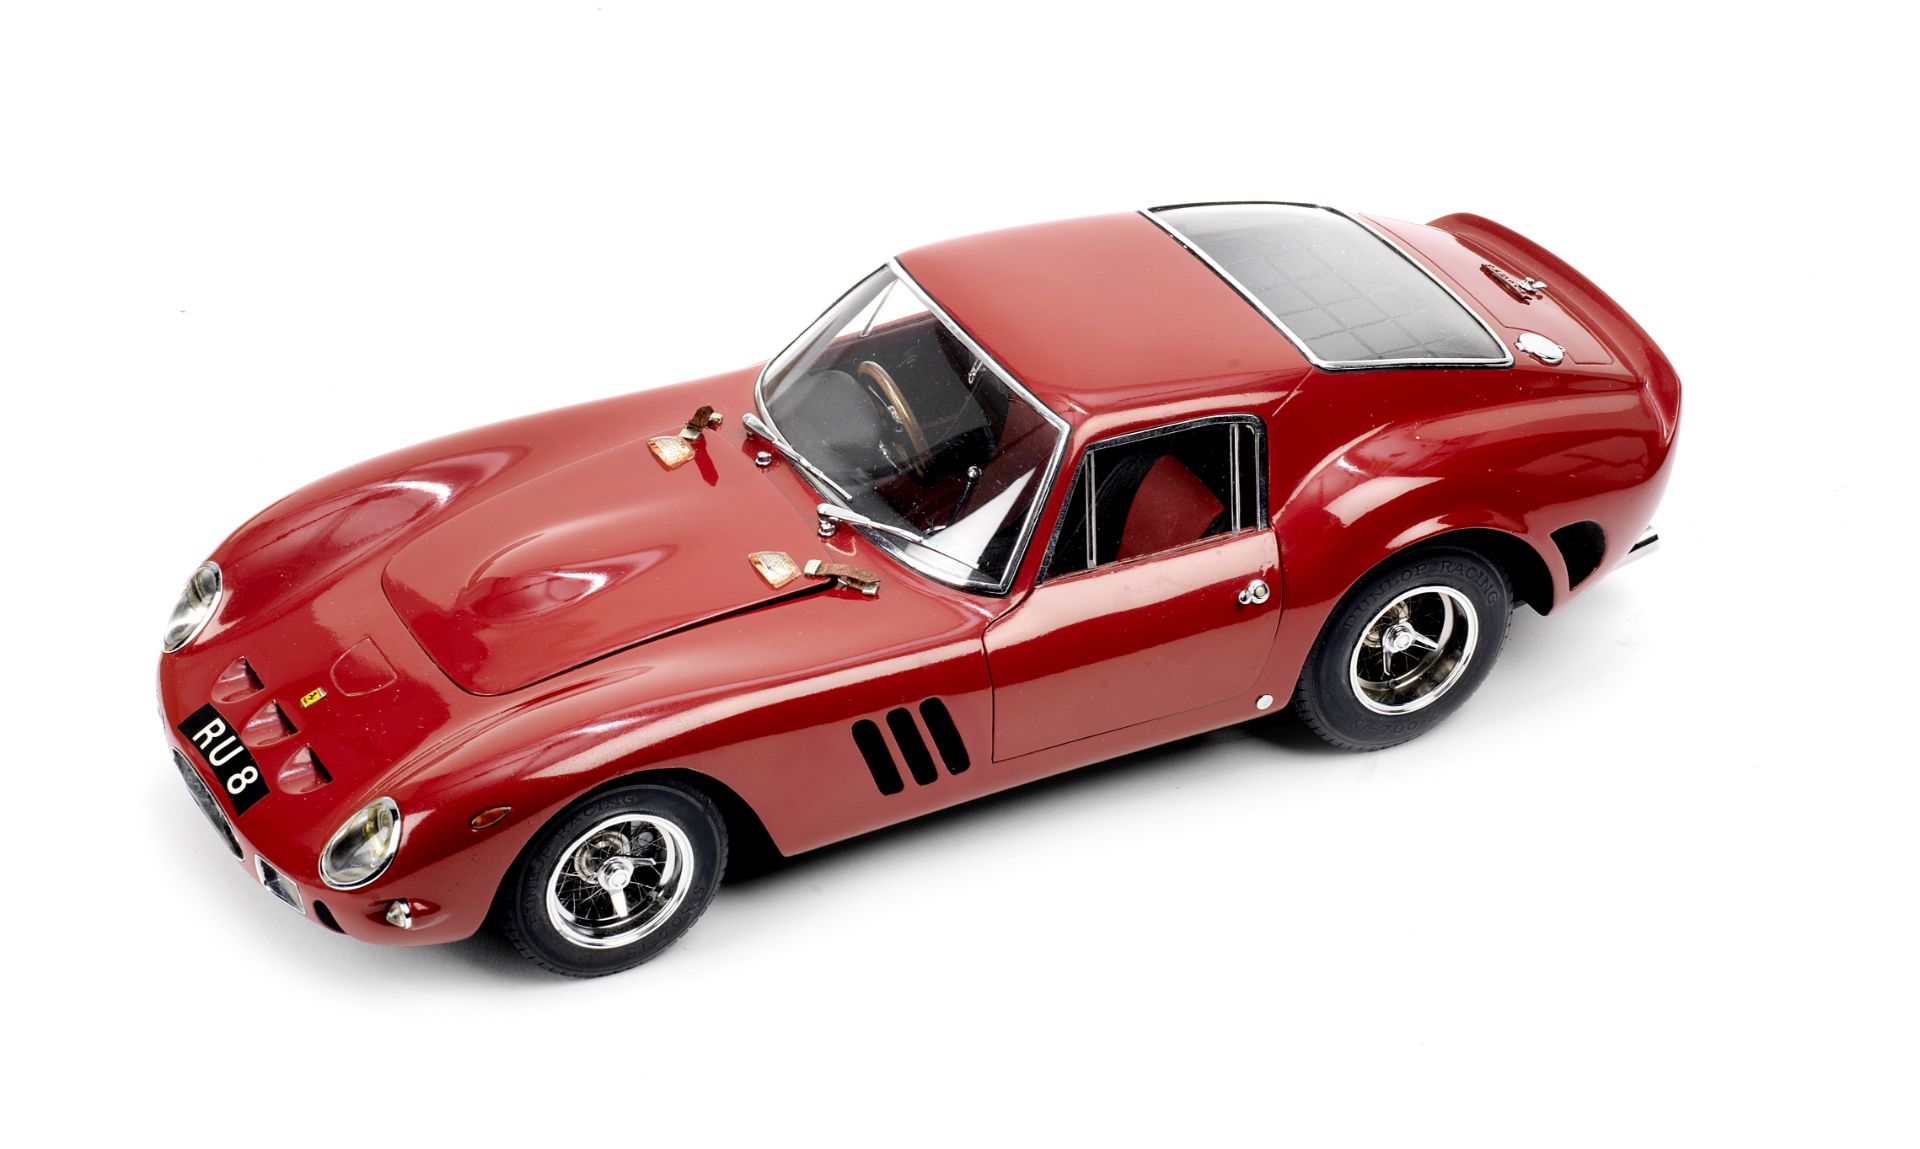 An exceptionally fine 1:15 scale scratch-built model of a 1963 Ferrari 250 GTO by Gerald Wingrove...